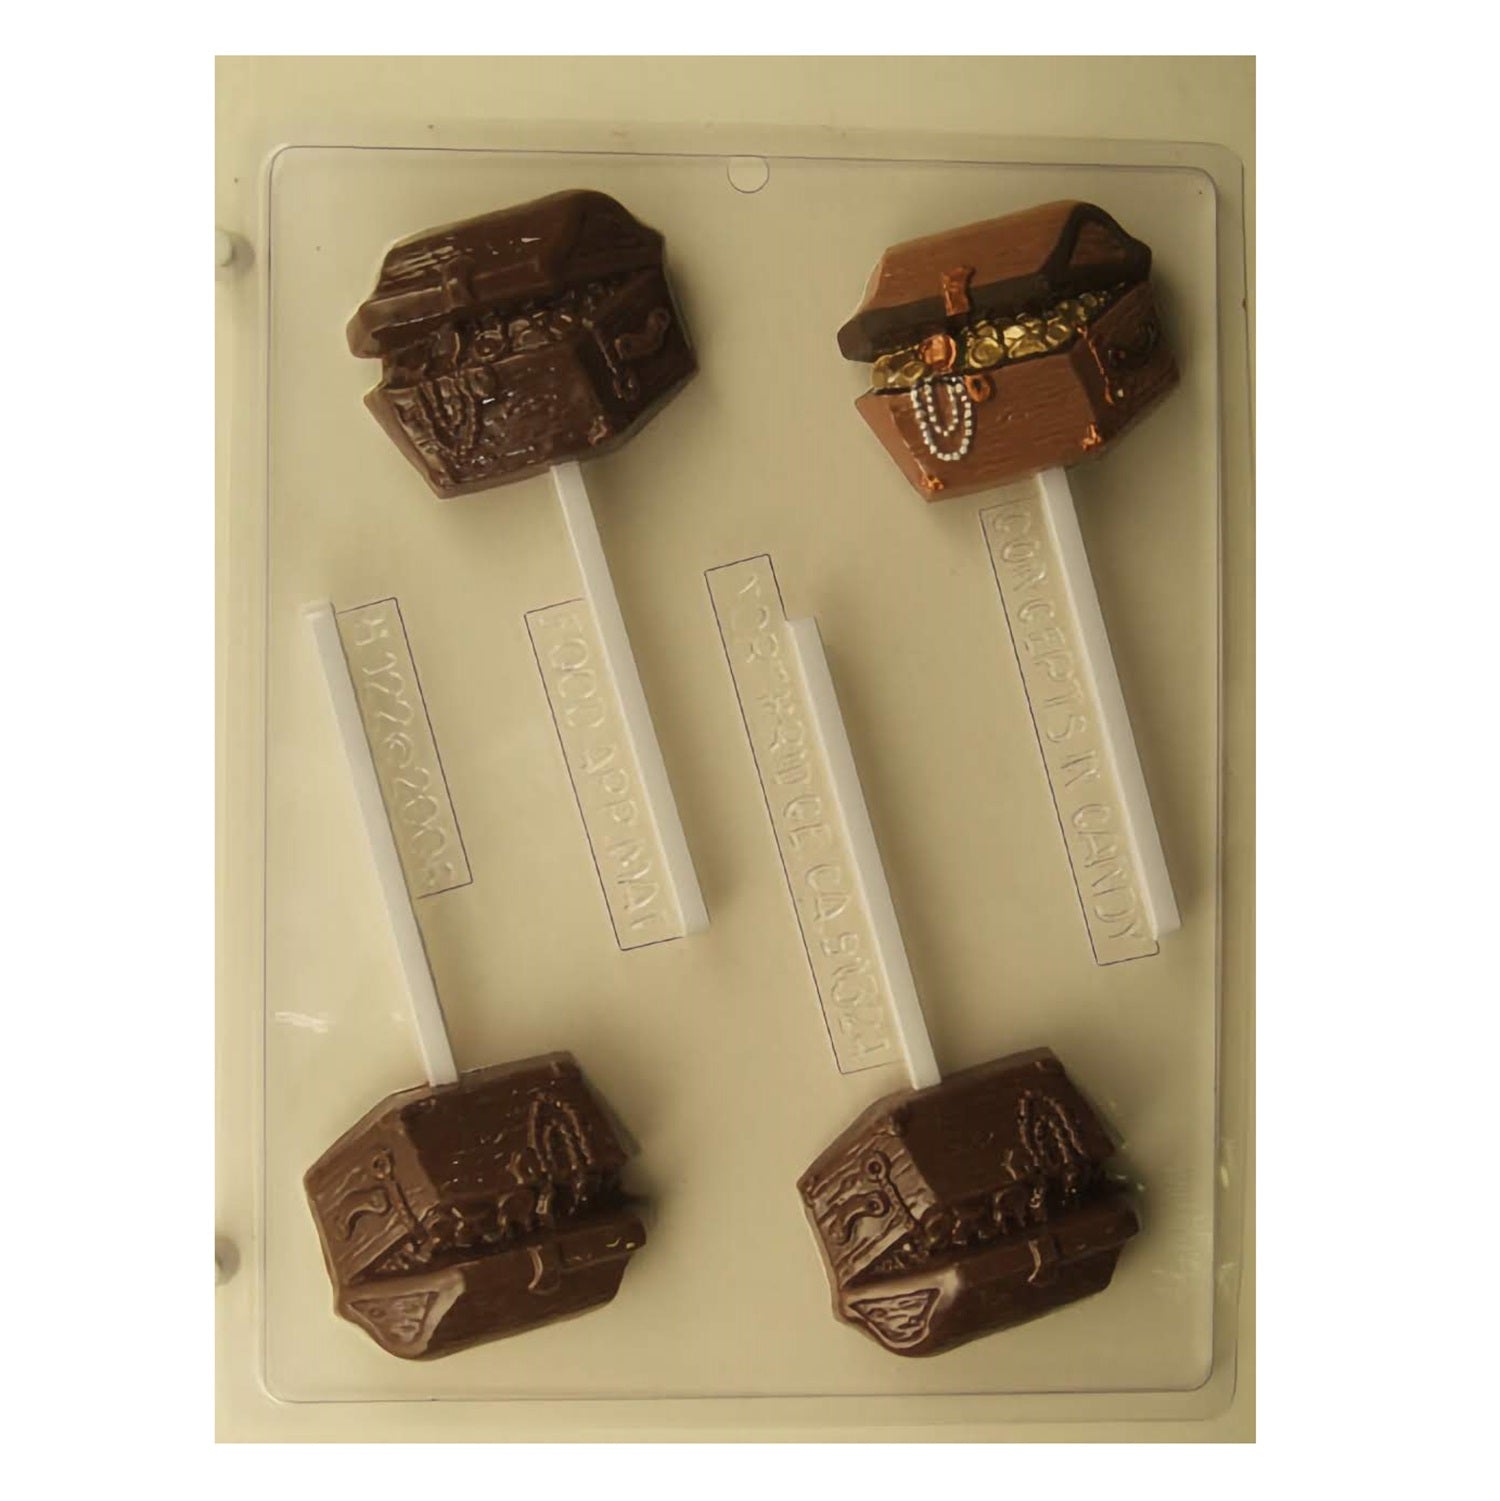 Chocolate mold and finished chocolates resembling ornate pirate treasure chests, complete with intricate lock and wood grain details, and adorned with 'pirate jewels' on one, perfect for themed parties, pirate enthusiasts, or as unique, edible gifts.